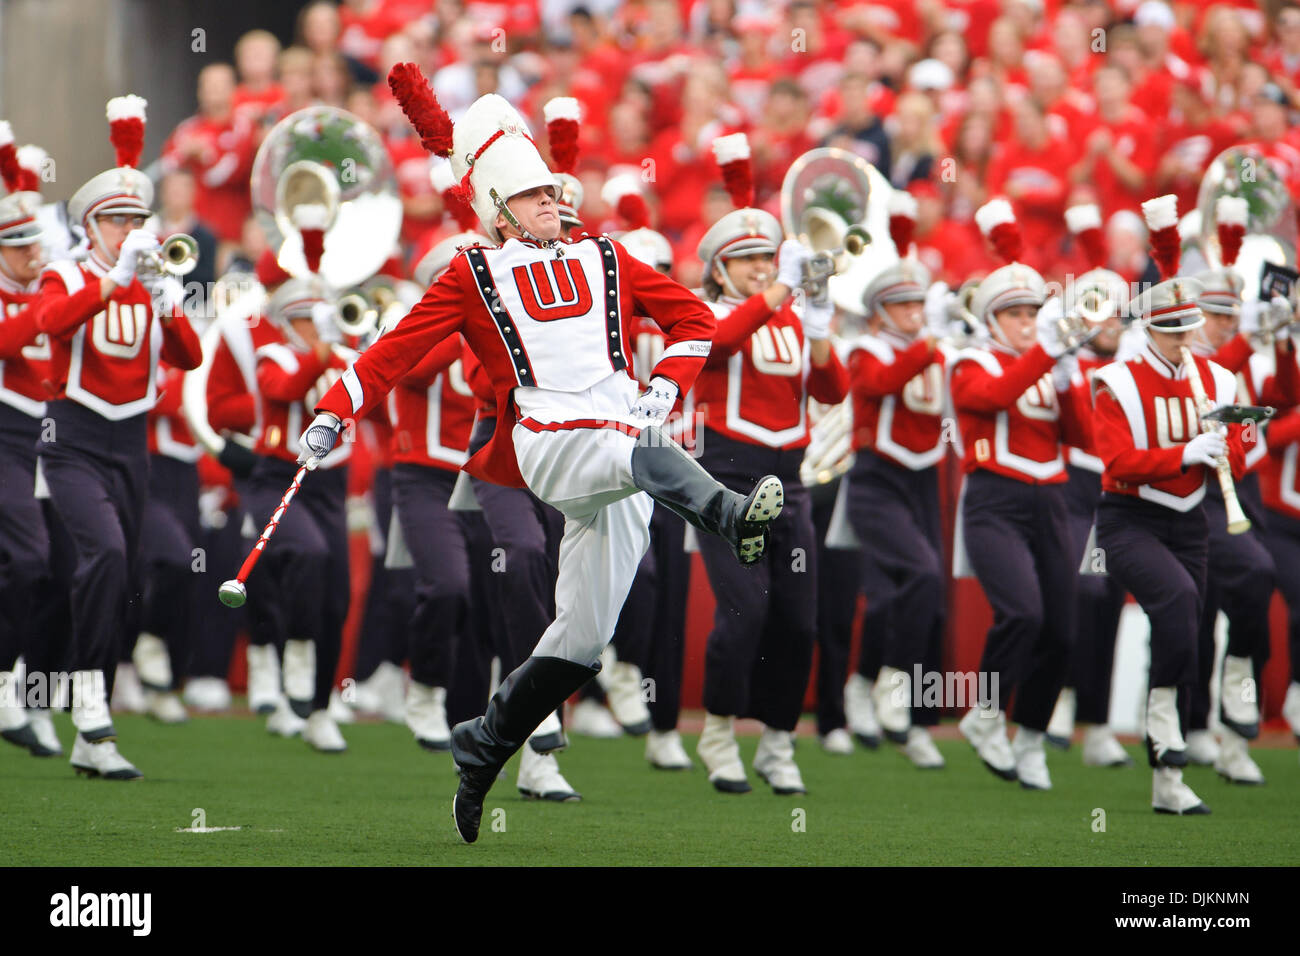 Sep. 11, 2010 - Madison, Wisconsin, United States of America - The Wisconsin marching band takes the field prior to the game between the Wisconsin Badgers and the San Jose State Spartans at Camp Randall Stadium in Madison, WI. Wisconsin defeated San Jose State 27-14. (Credit Image: © John Rowland/Southcreek Global/ZUMApress.com) Stock Photo